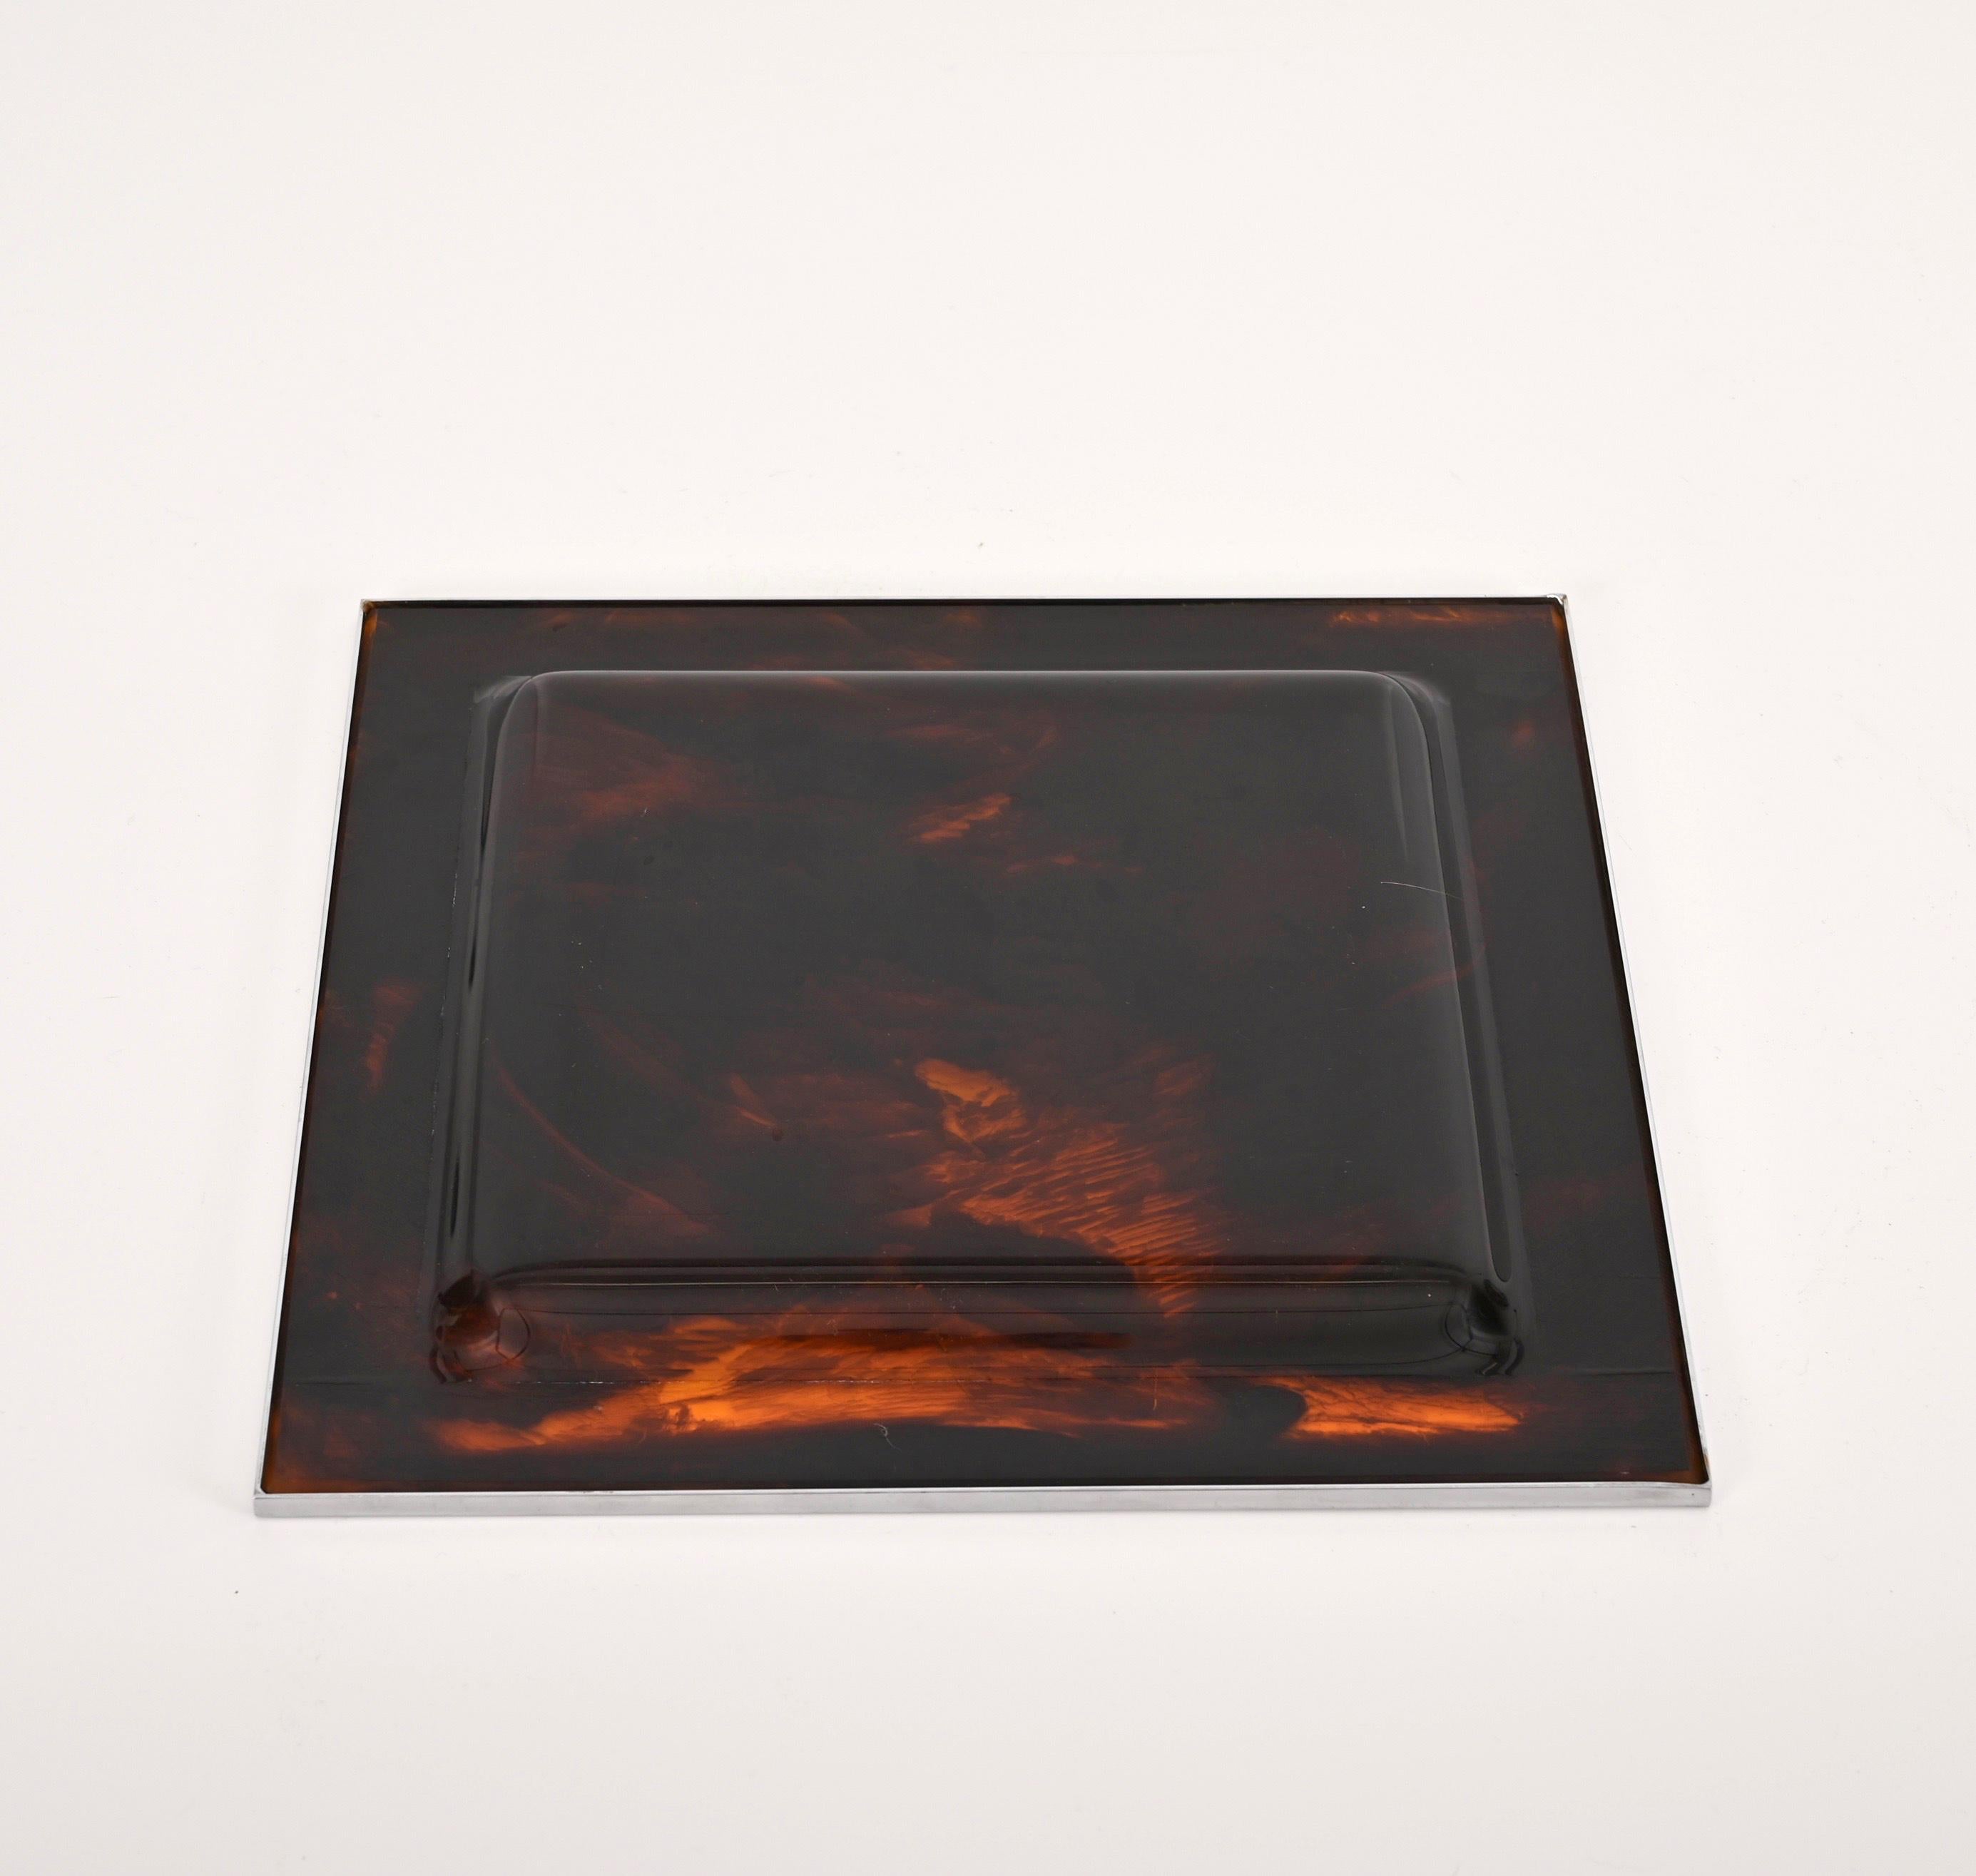 Christian Dior Midcentury Tortoiseshell and Lucite Italian Serving Tray, 1970s For Sale 6